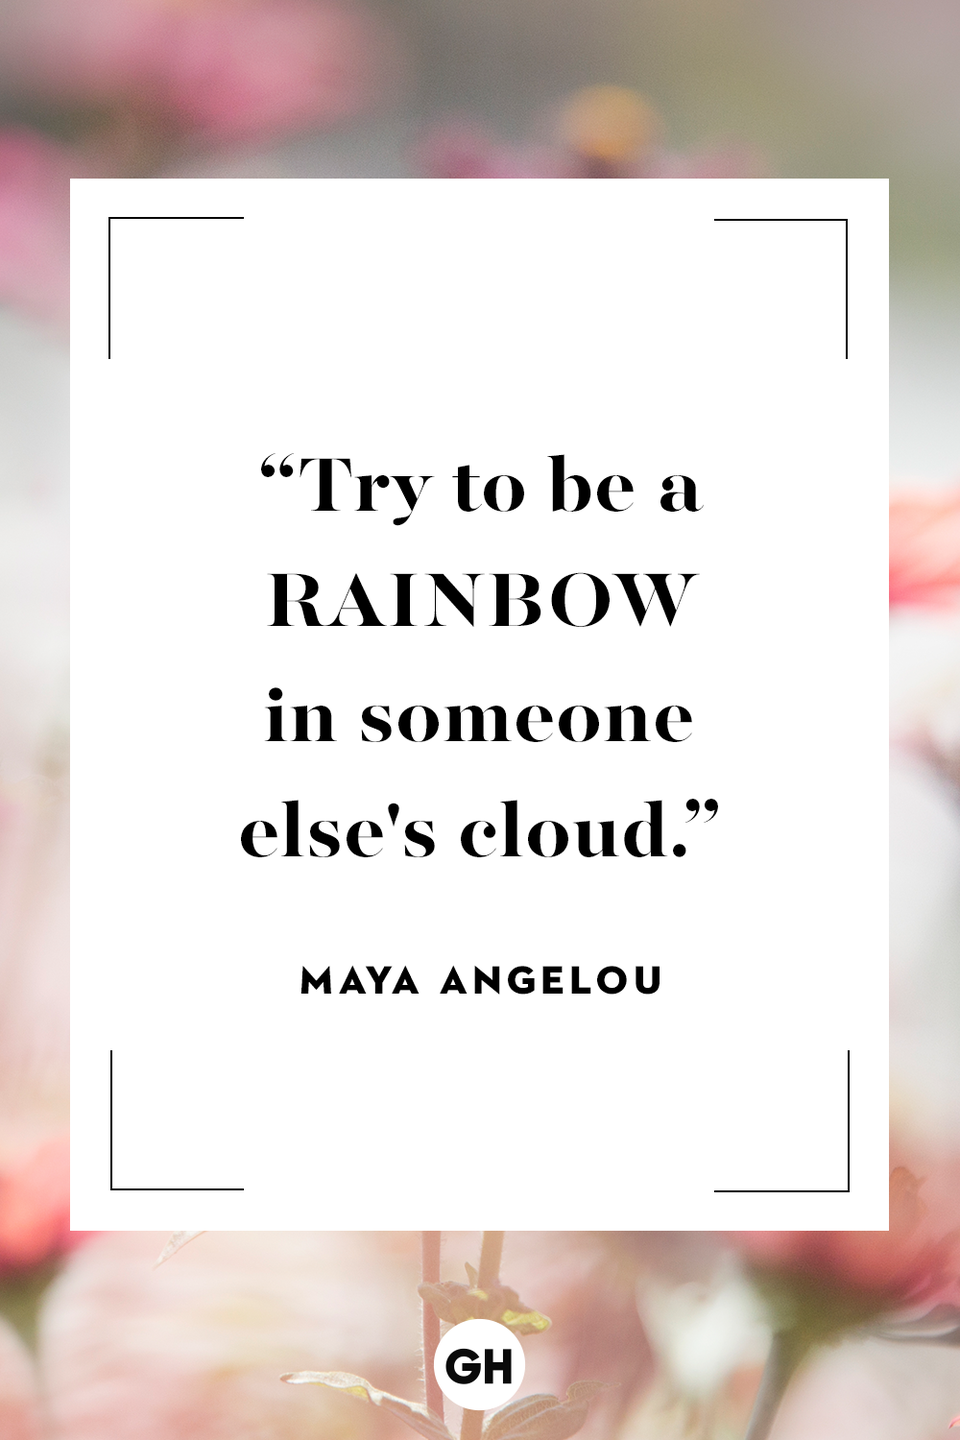 <p>Try to be a rainbow in someone else's cloud.</p>